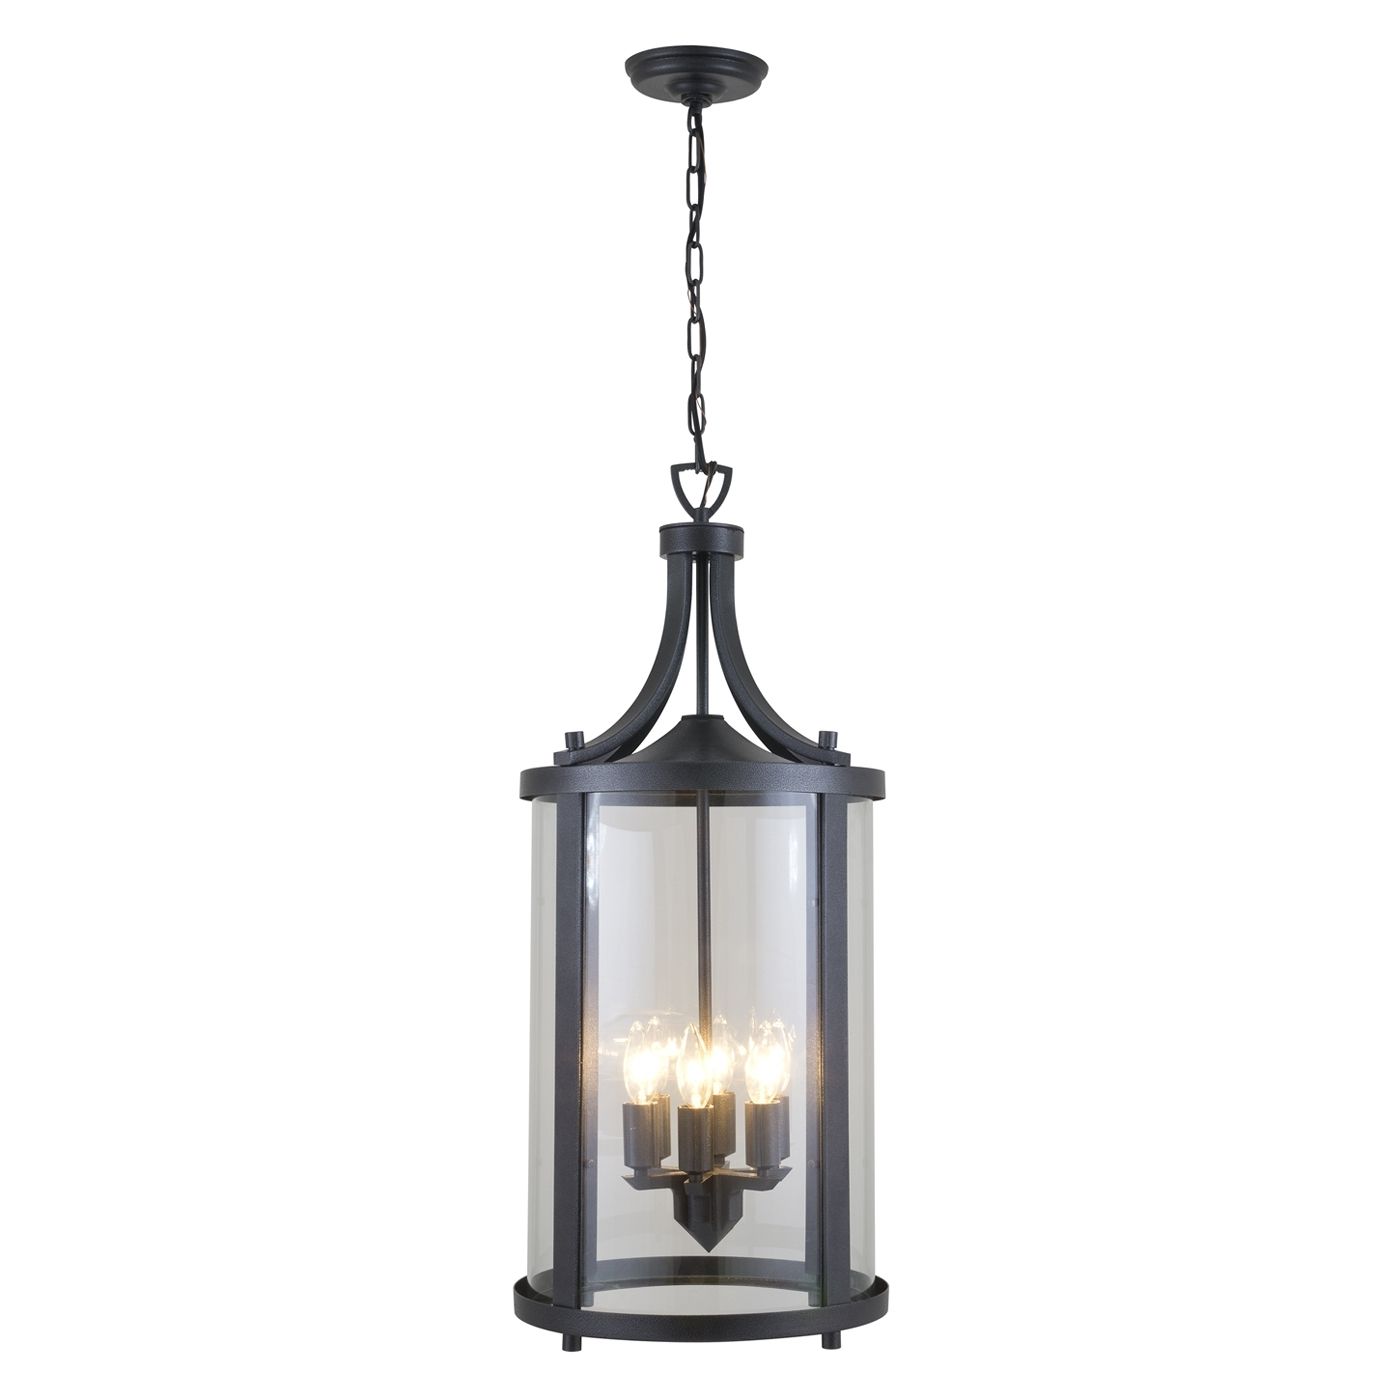 Dvi Niagara Outdoor Large Pendant | Lowe's Canada With Regard To Outdoor Hanging Lights From Canada (Photo 1 of 15)